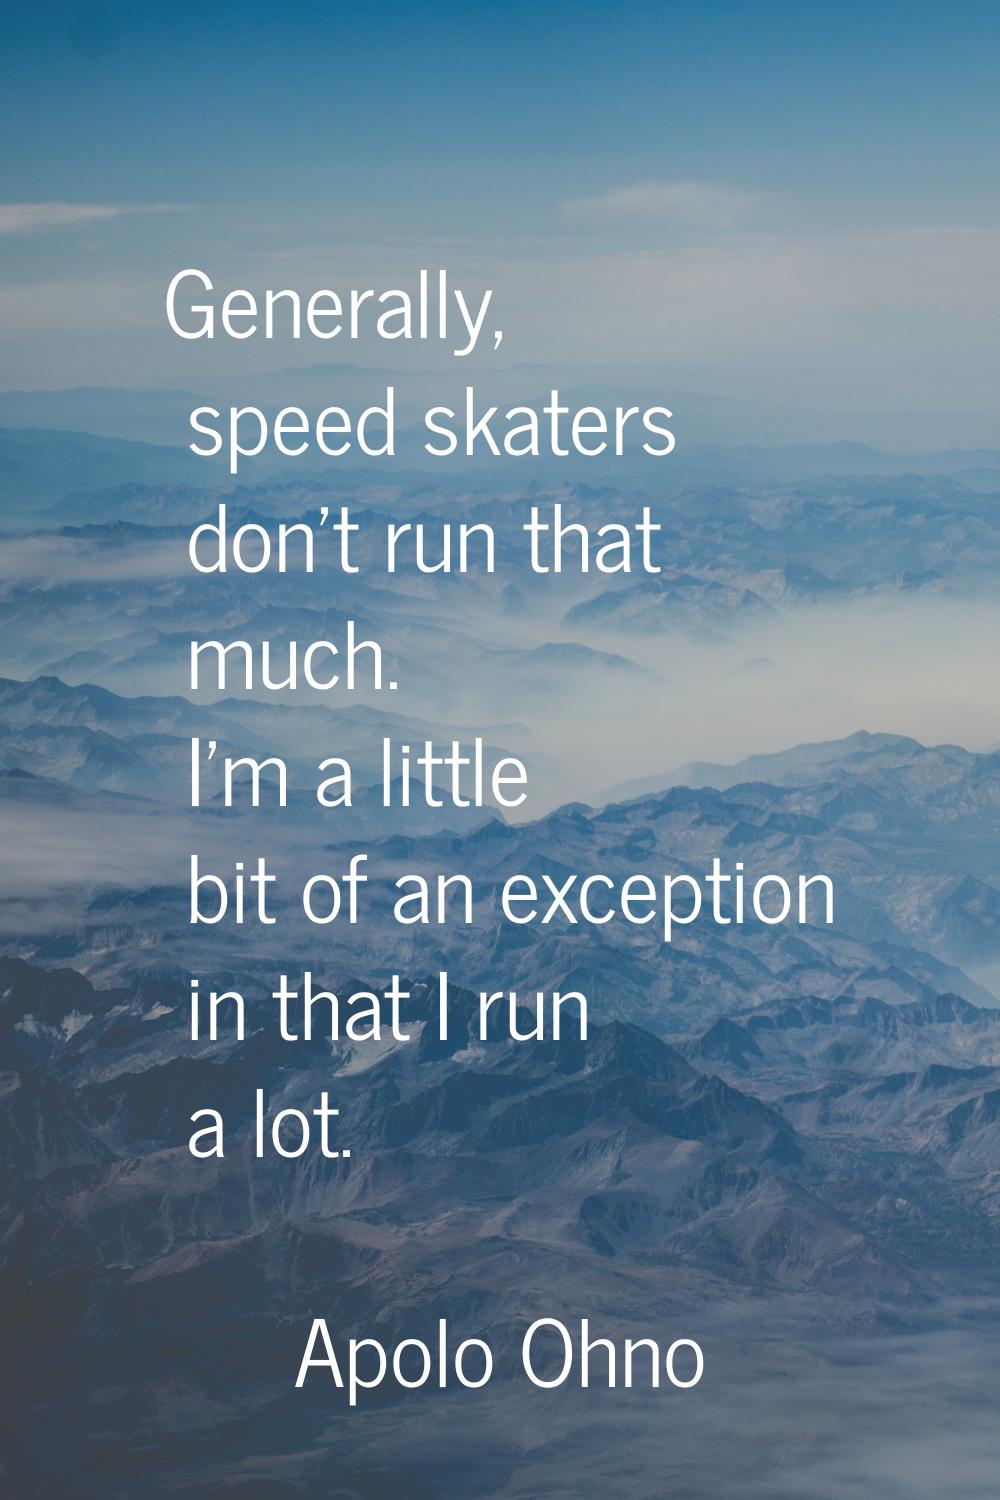 Generally, speed skaters don't run that much. I'm a little bit of an exception in that I run a lot.